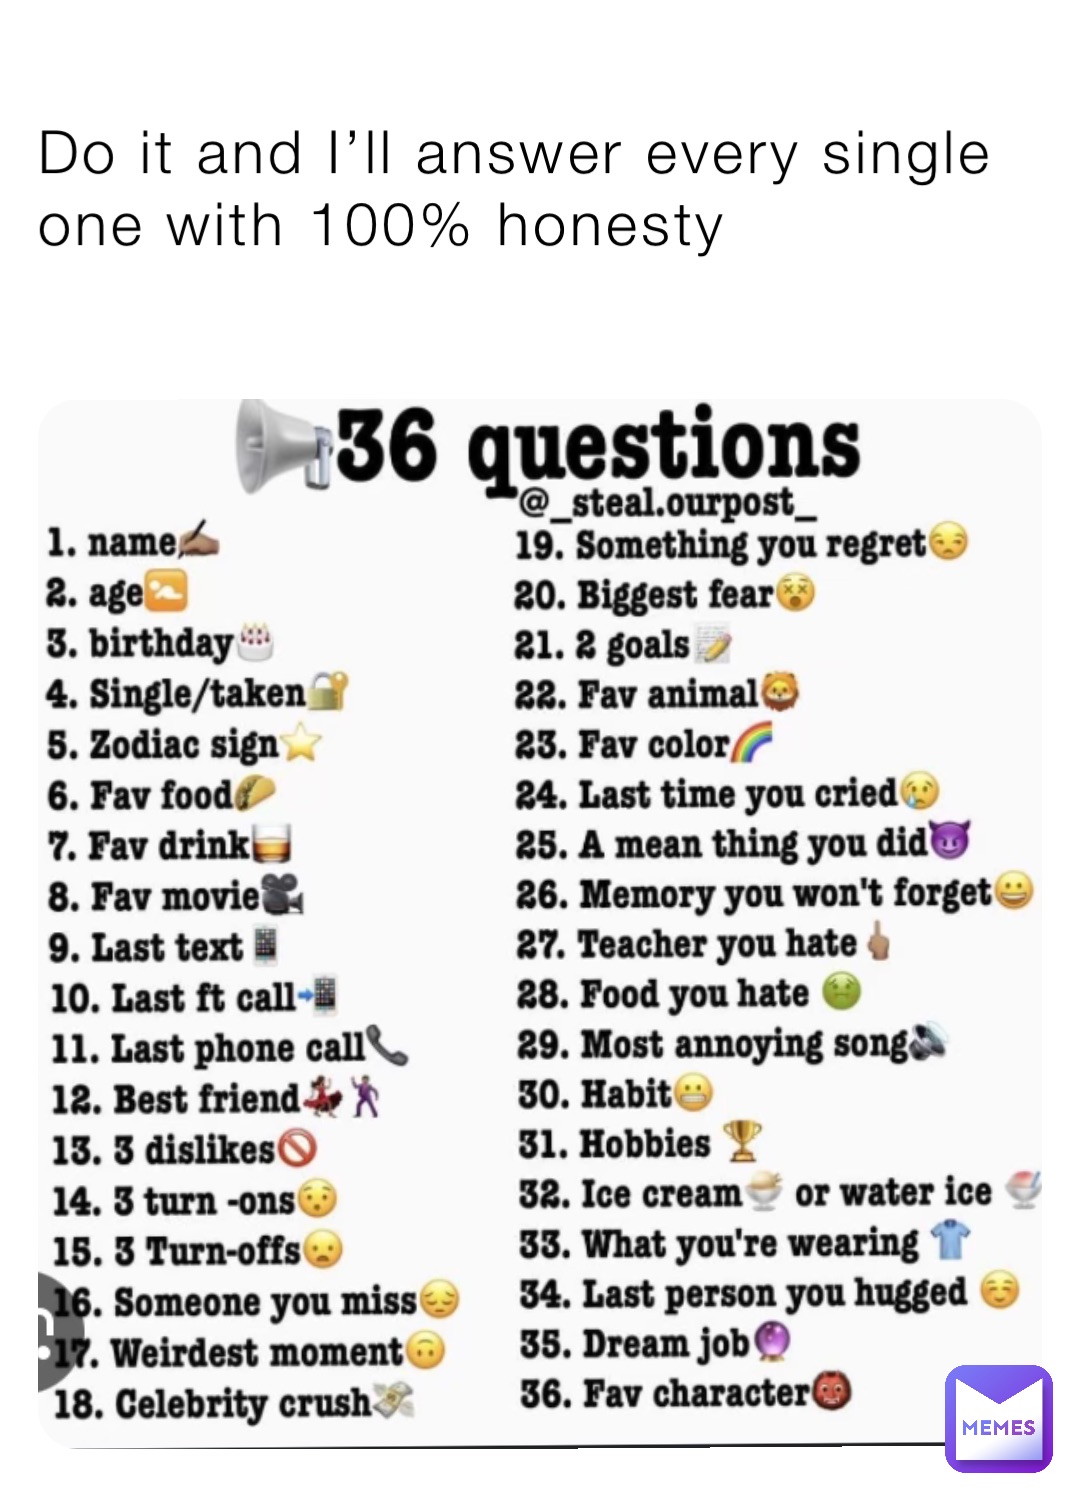 Do it and I’ll answer every single one with 100% honesty